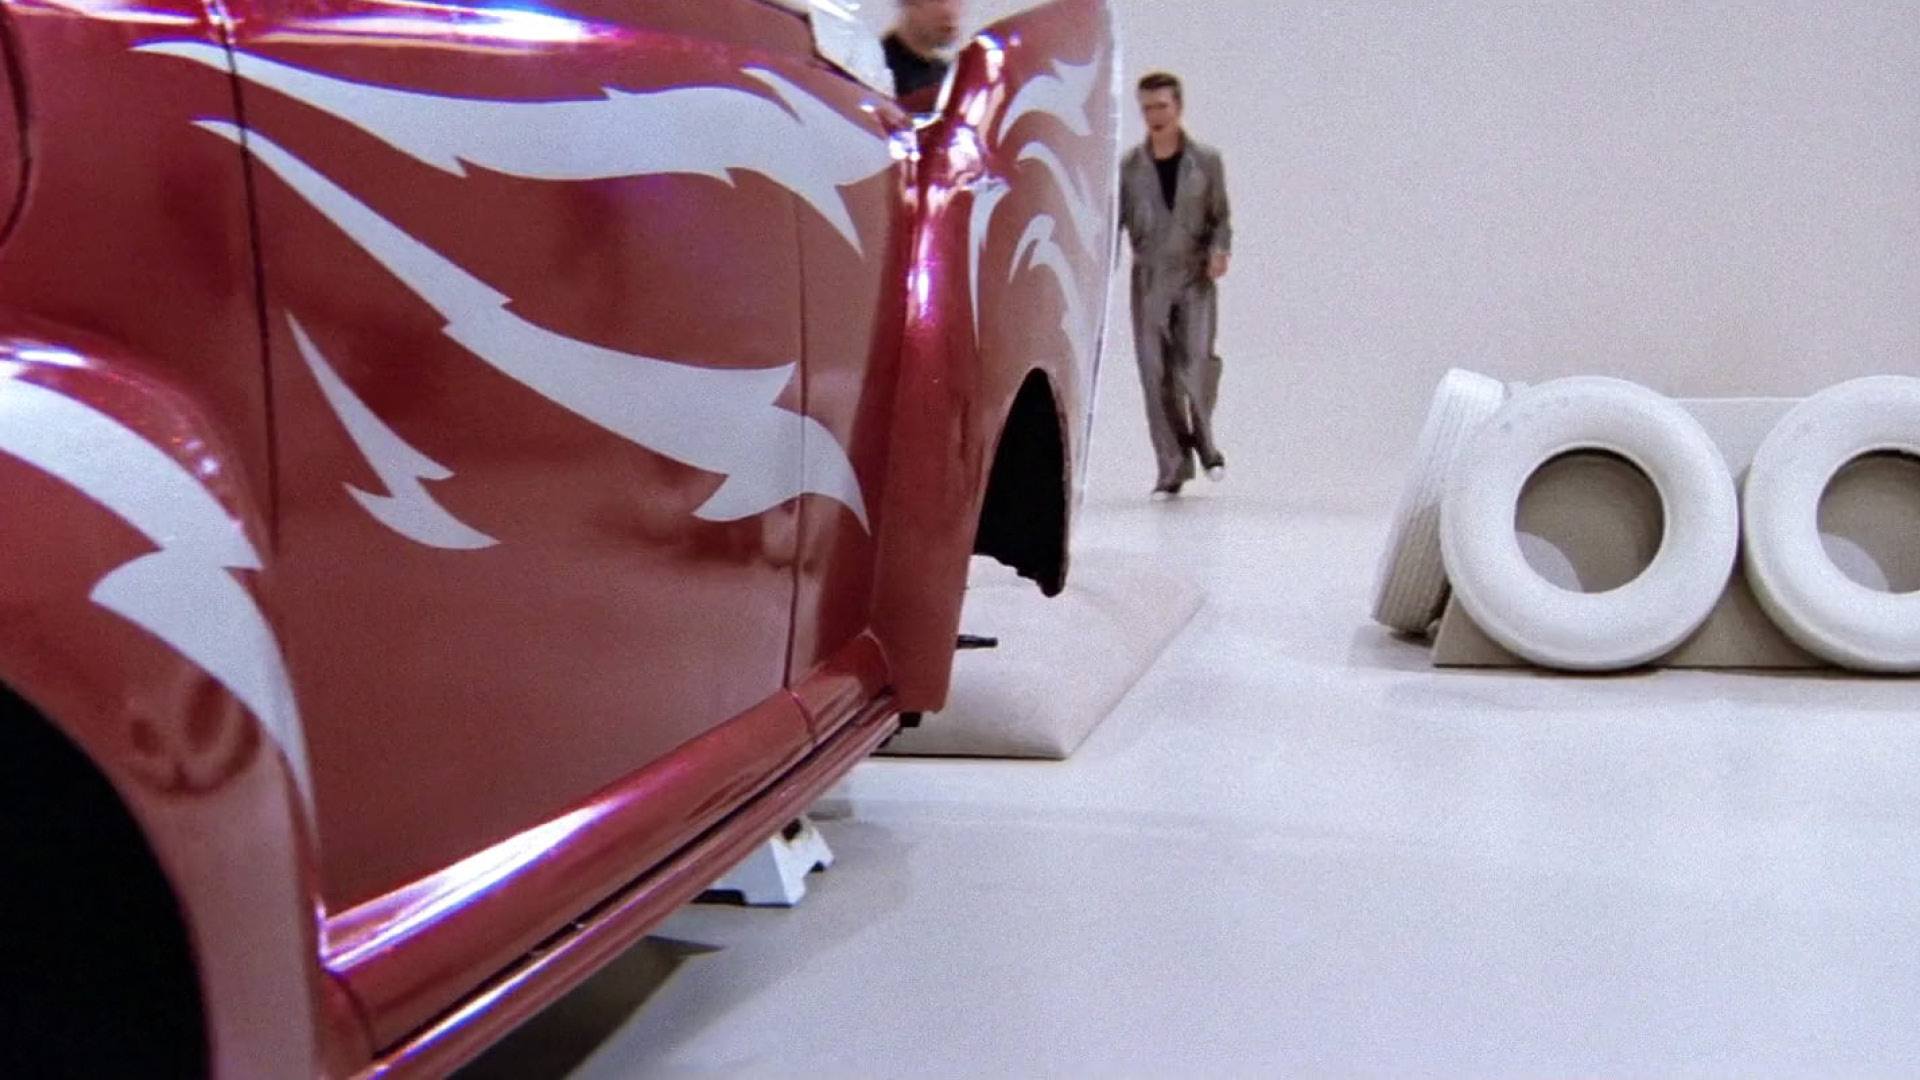 GREASE film still of the side of a red hot rod